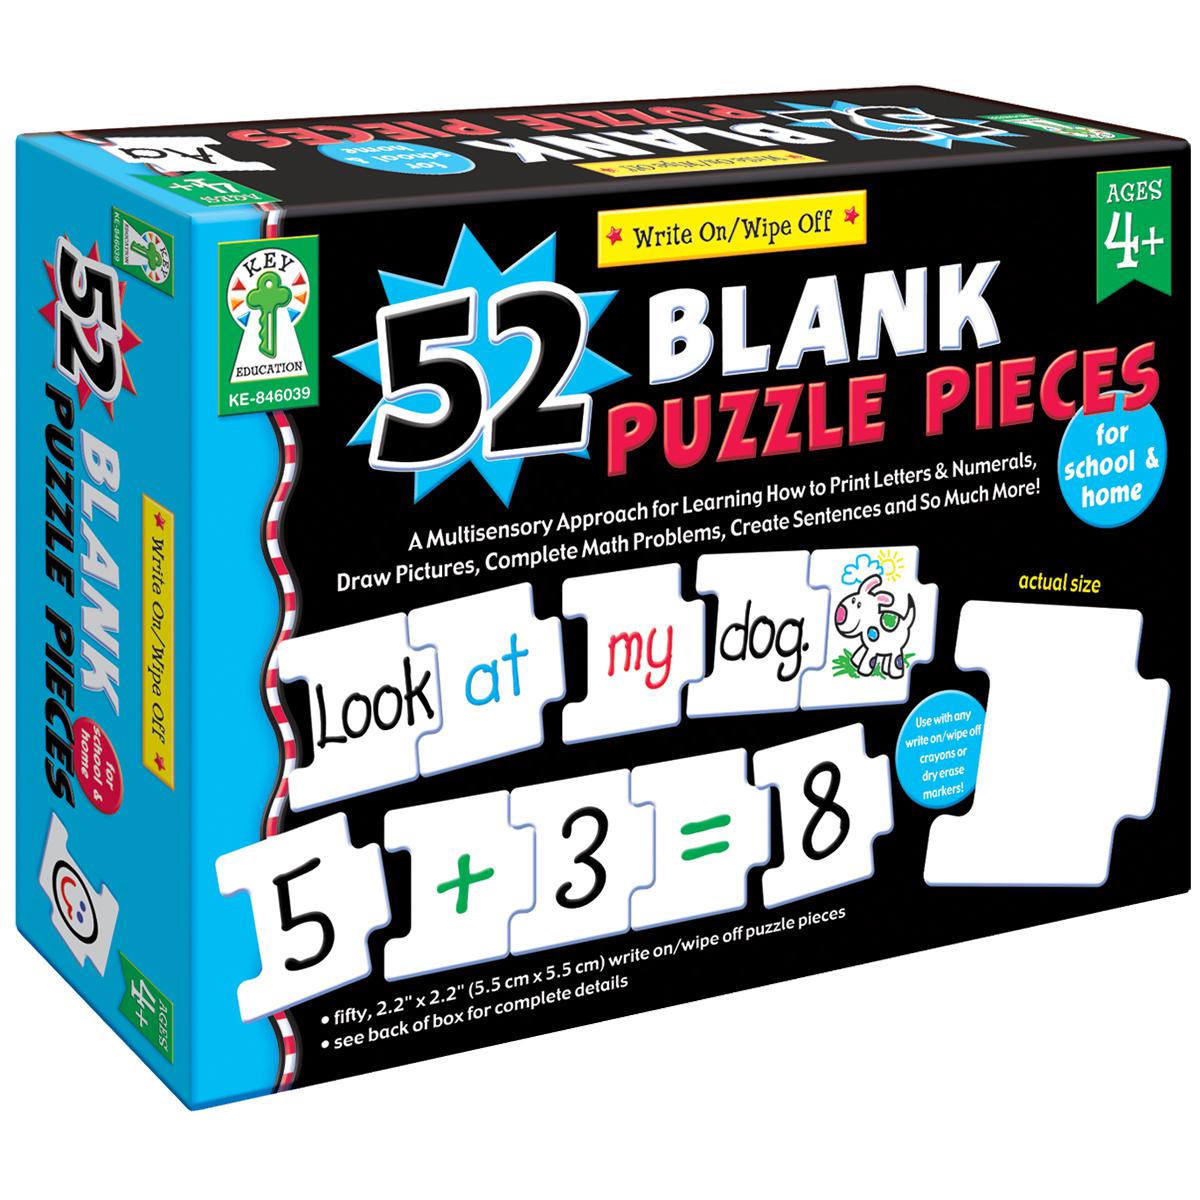  Write-on/Wipe-Off: 52 Blank Puzzle Pieces 